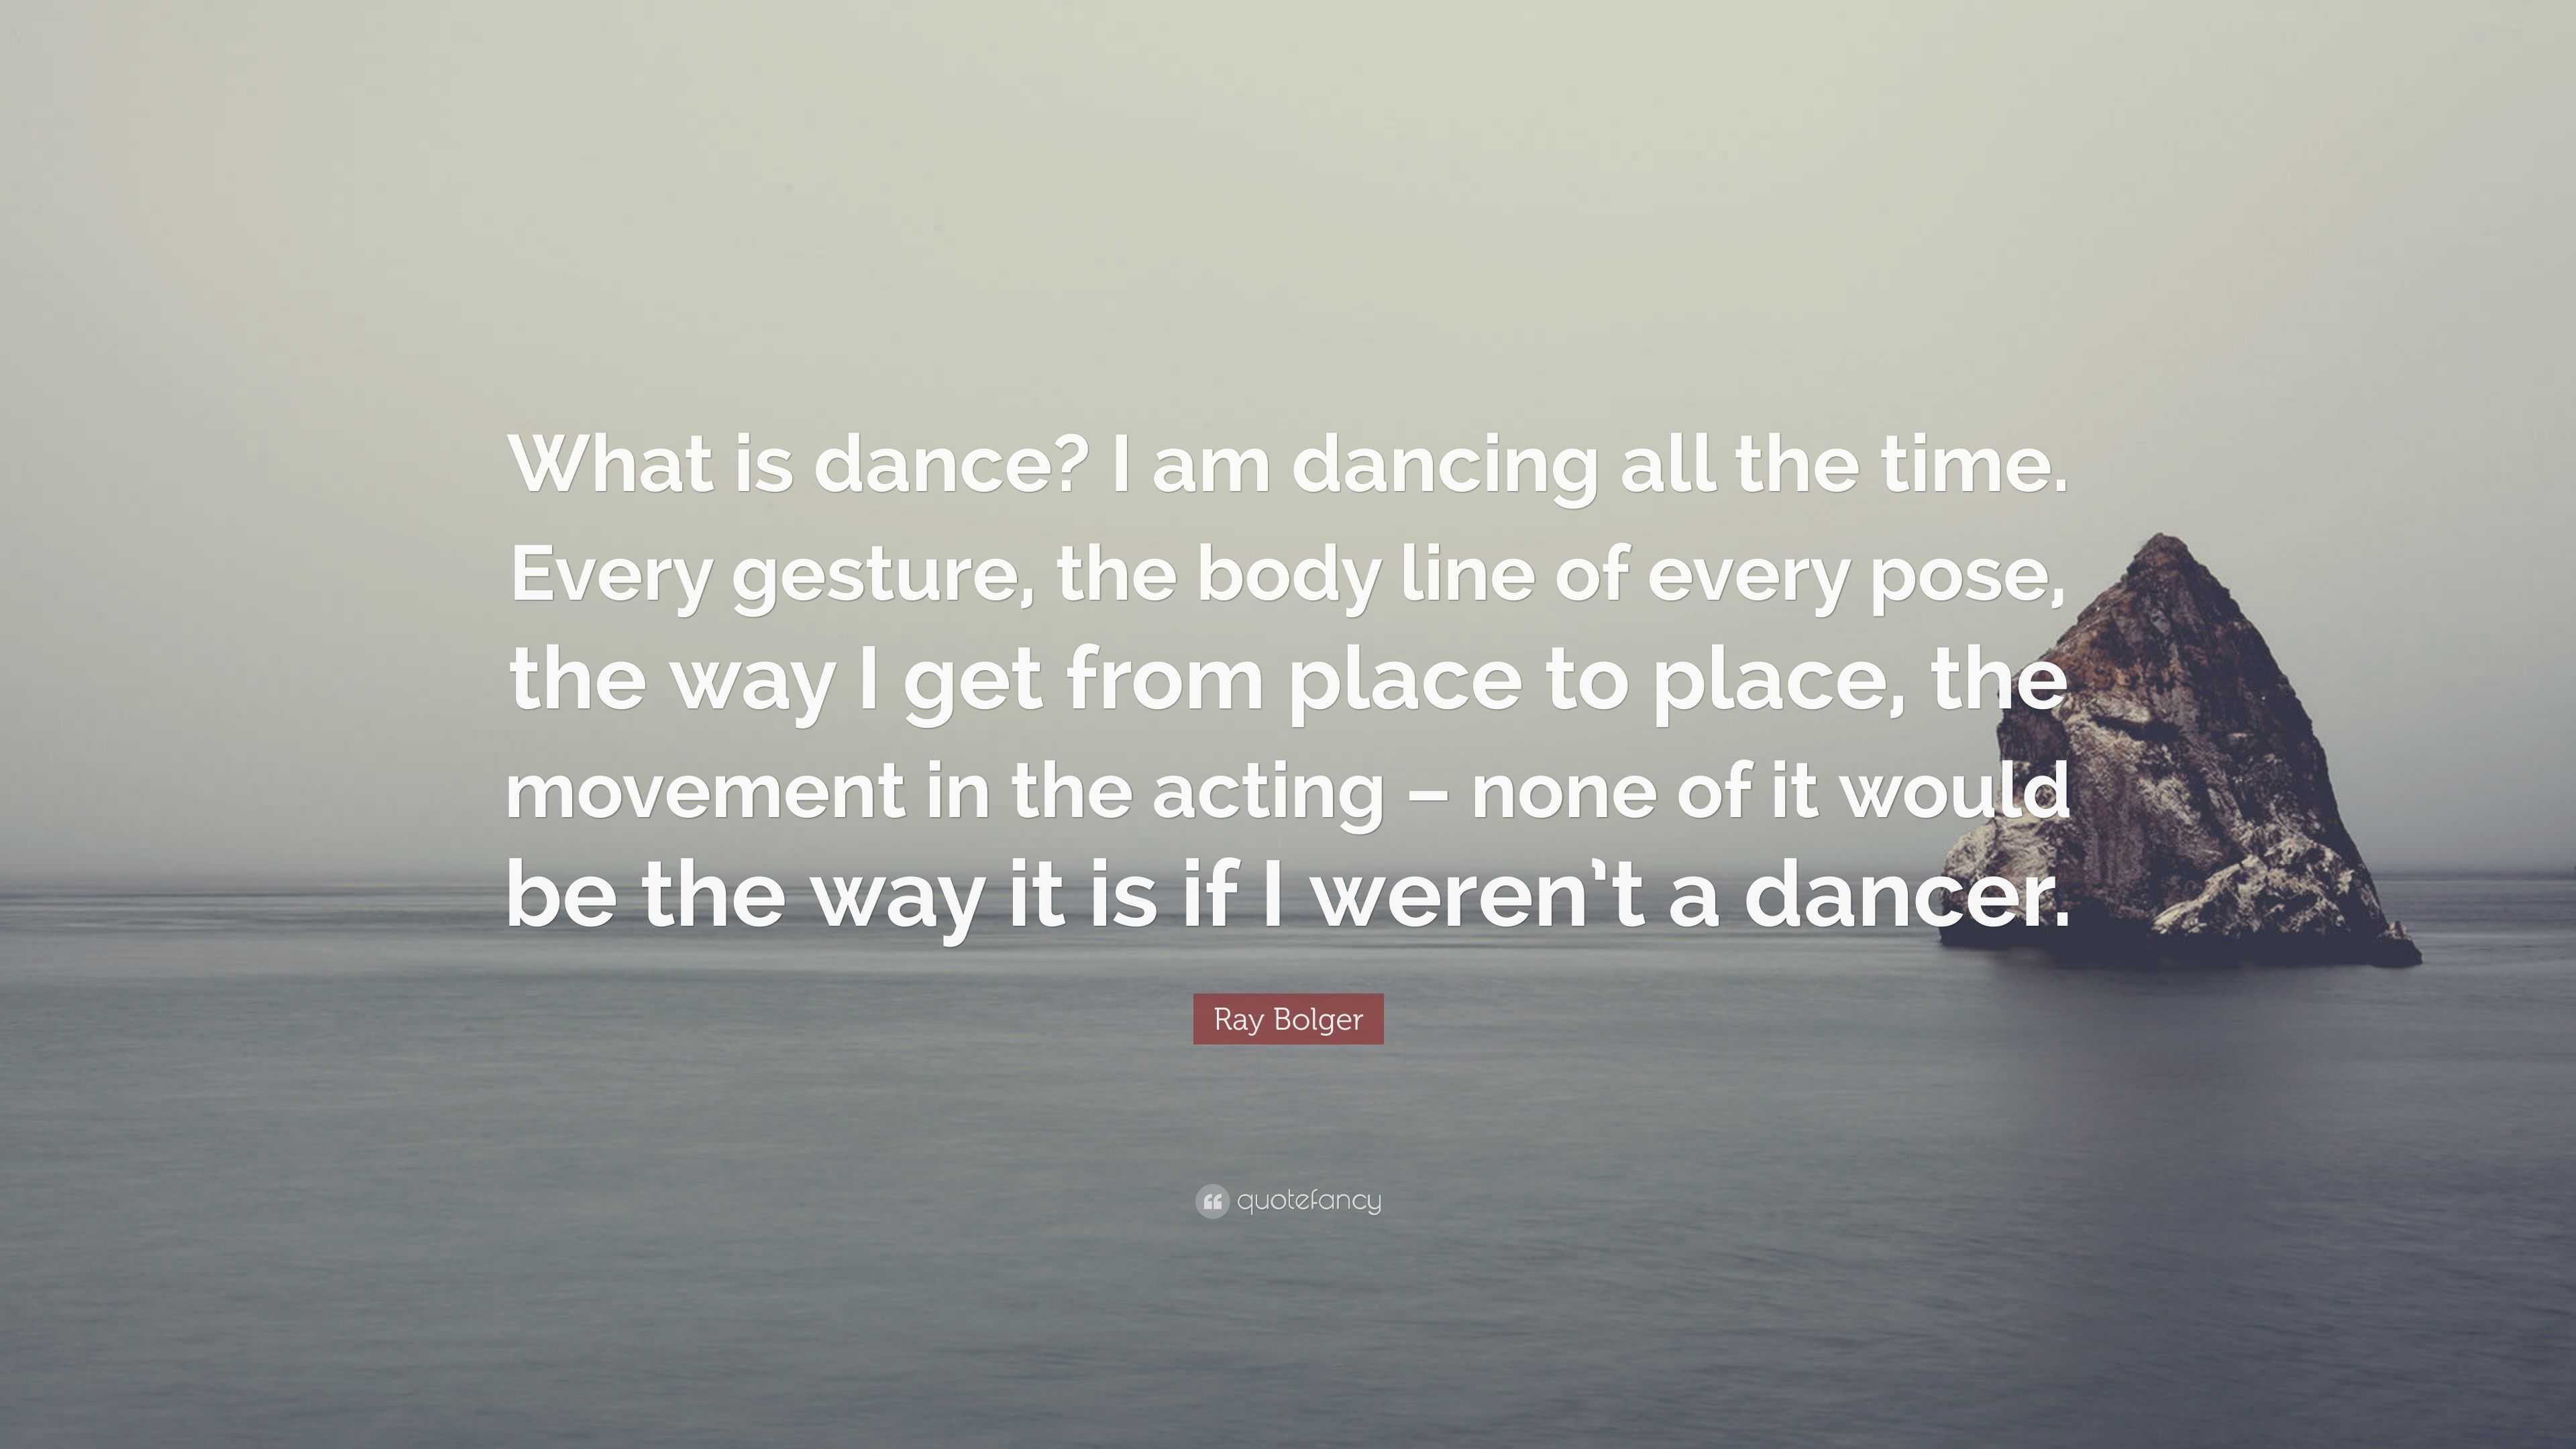 Express Yourself With These Inspirational Dance Quotes - Dance Poise